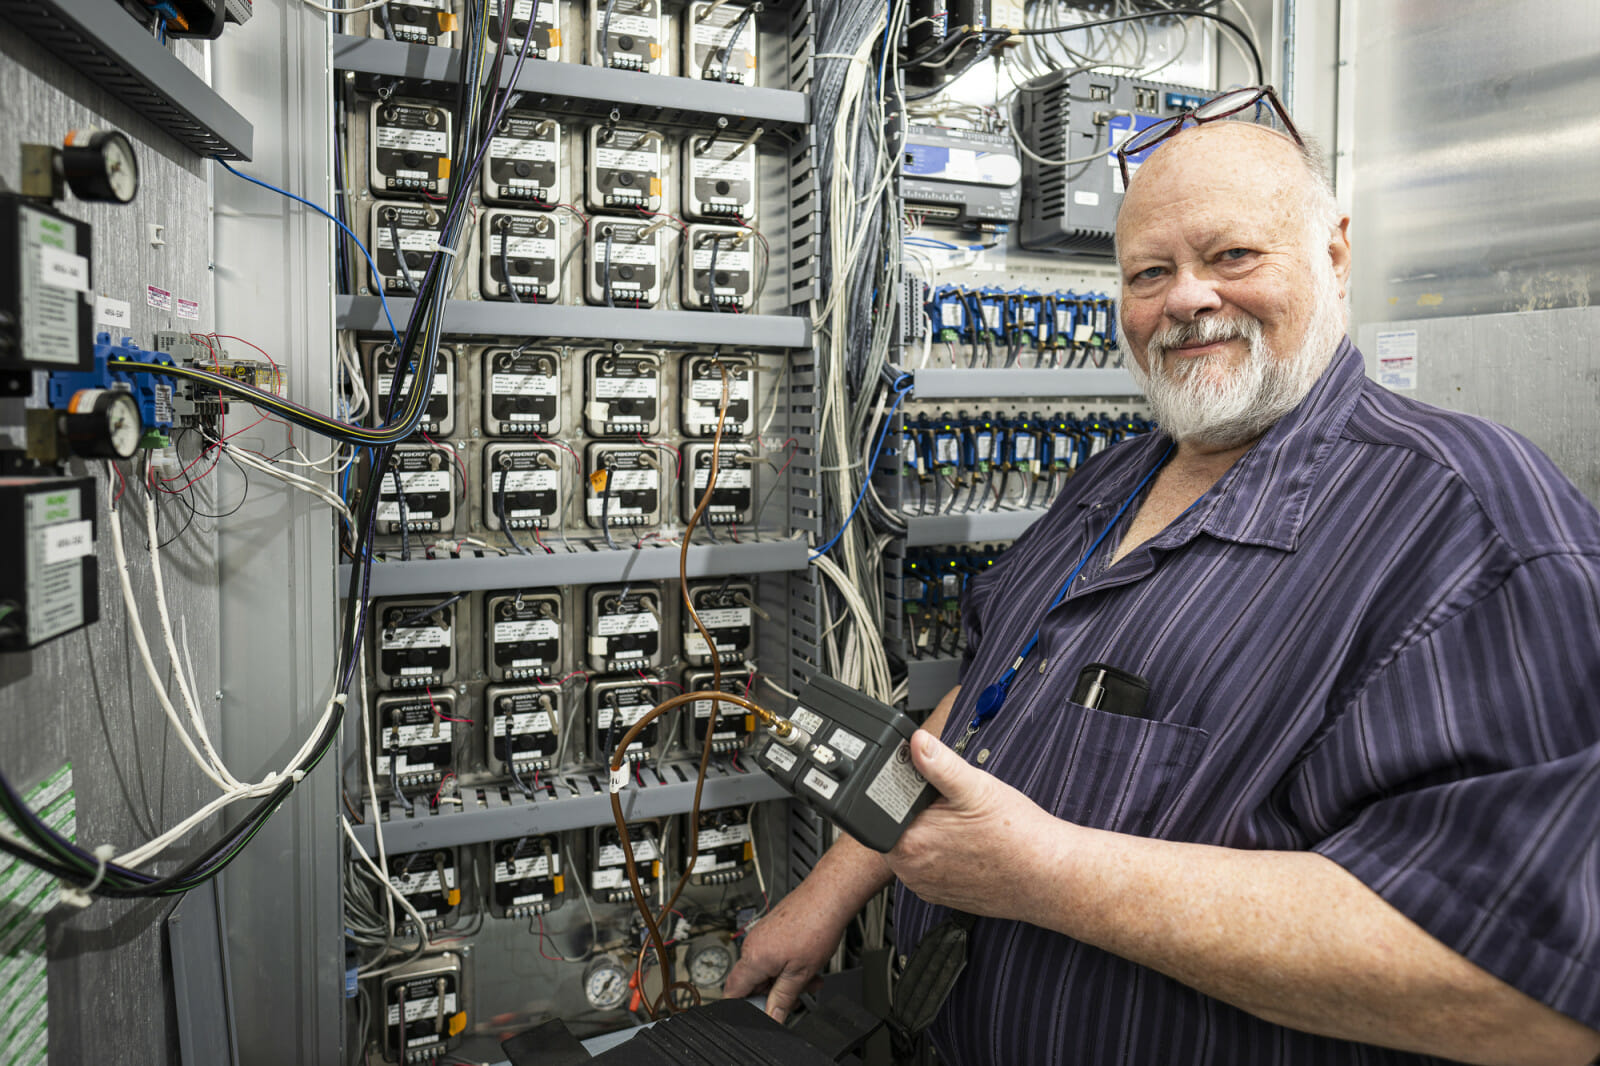 A man stands in front of a piece of equipment with wires sticking out of it.